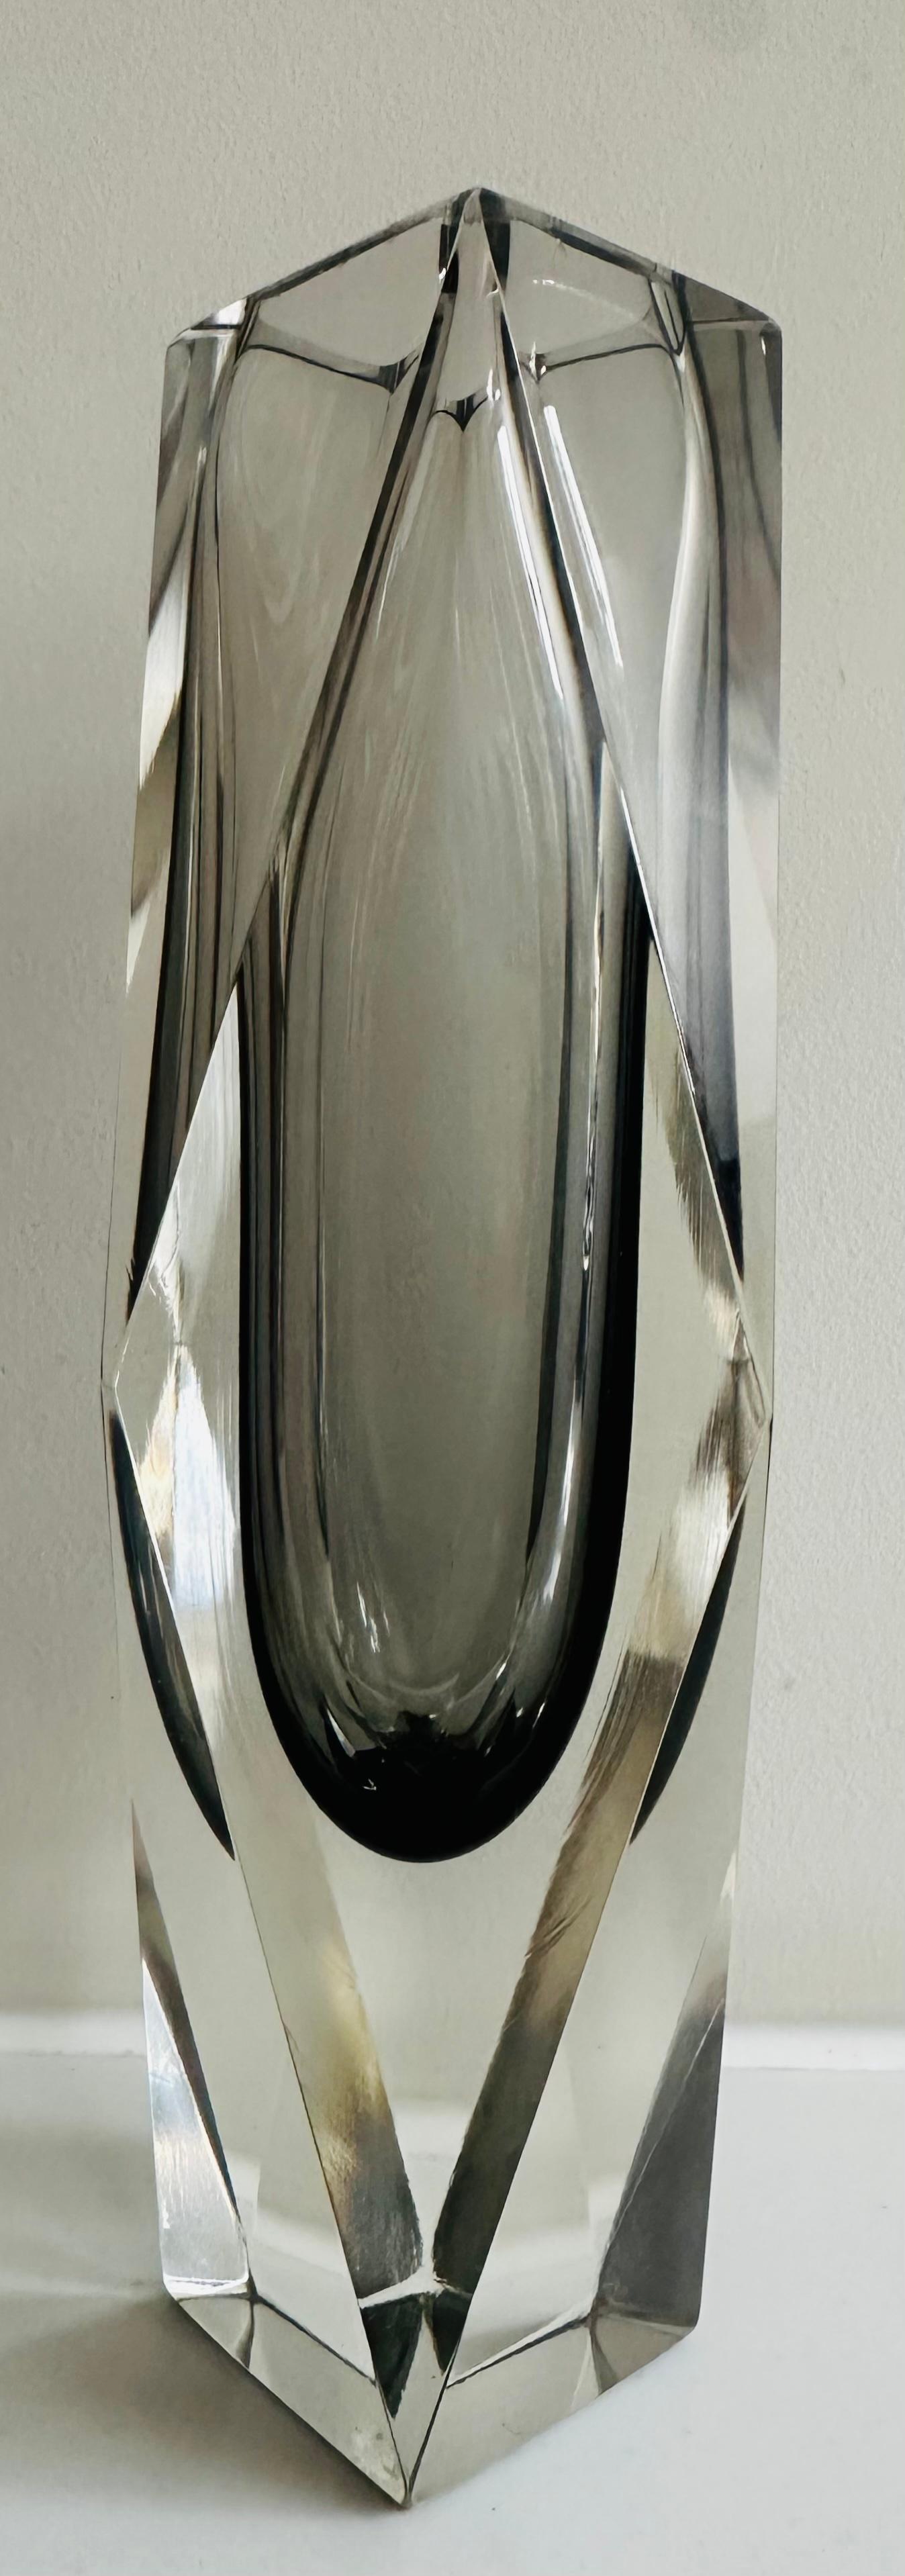 1960s Italian Murano Grey & Clear Faceted Geometric Sommerso Glass Vase For Sale 3